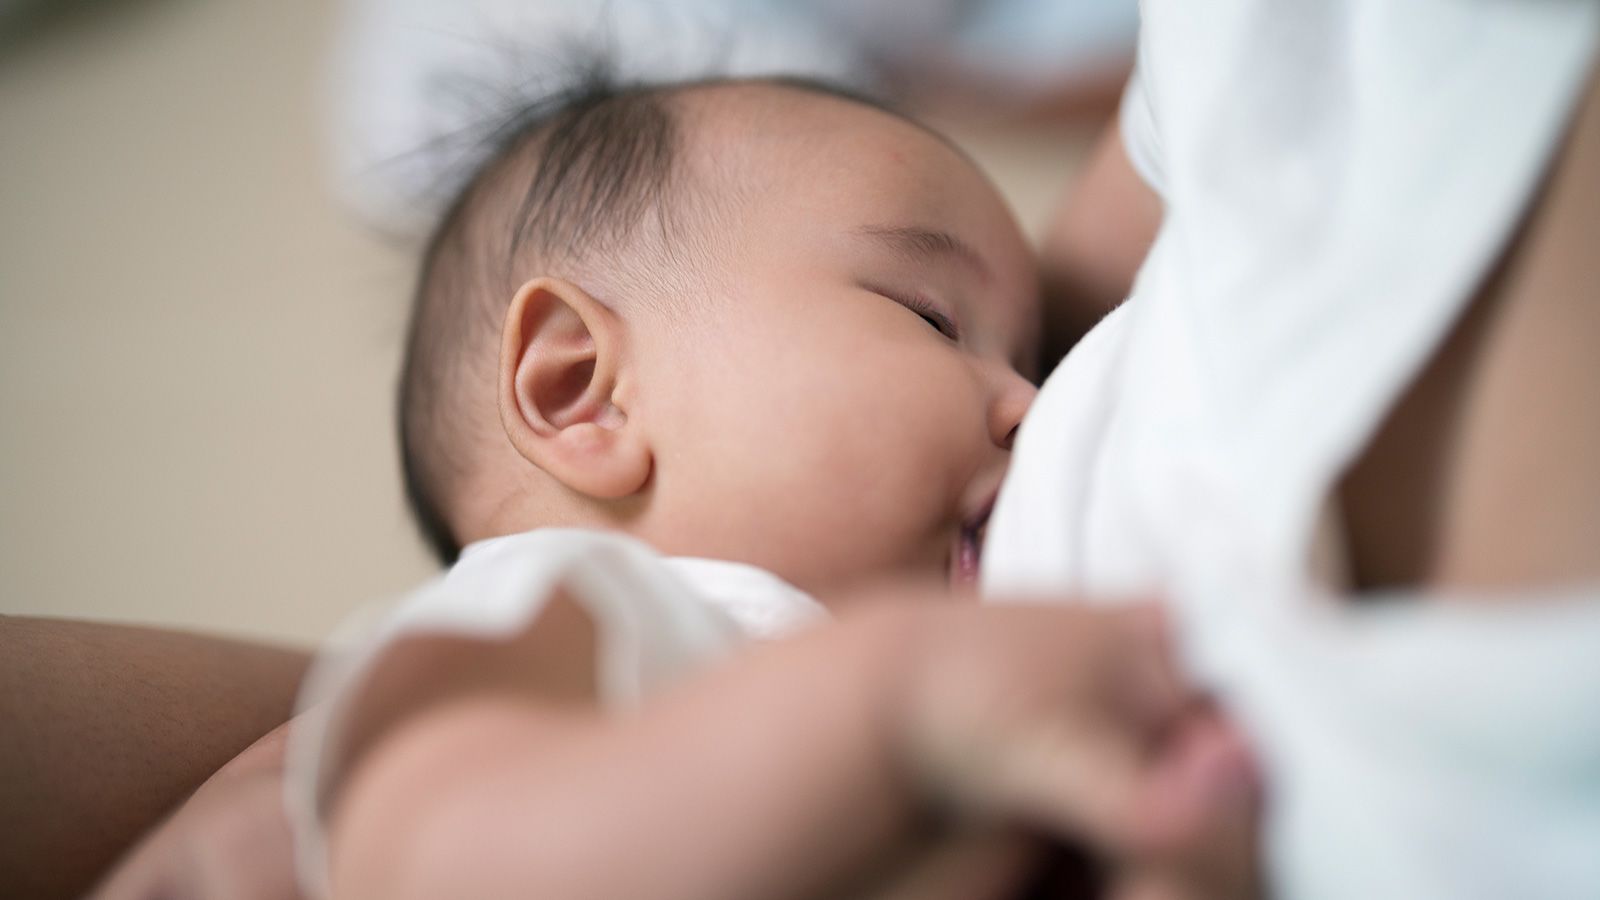 1600px x 900px - Fathers' role in breastfeeding and infant sleep is key, study finds | CNN